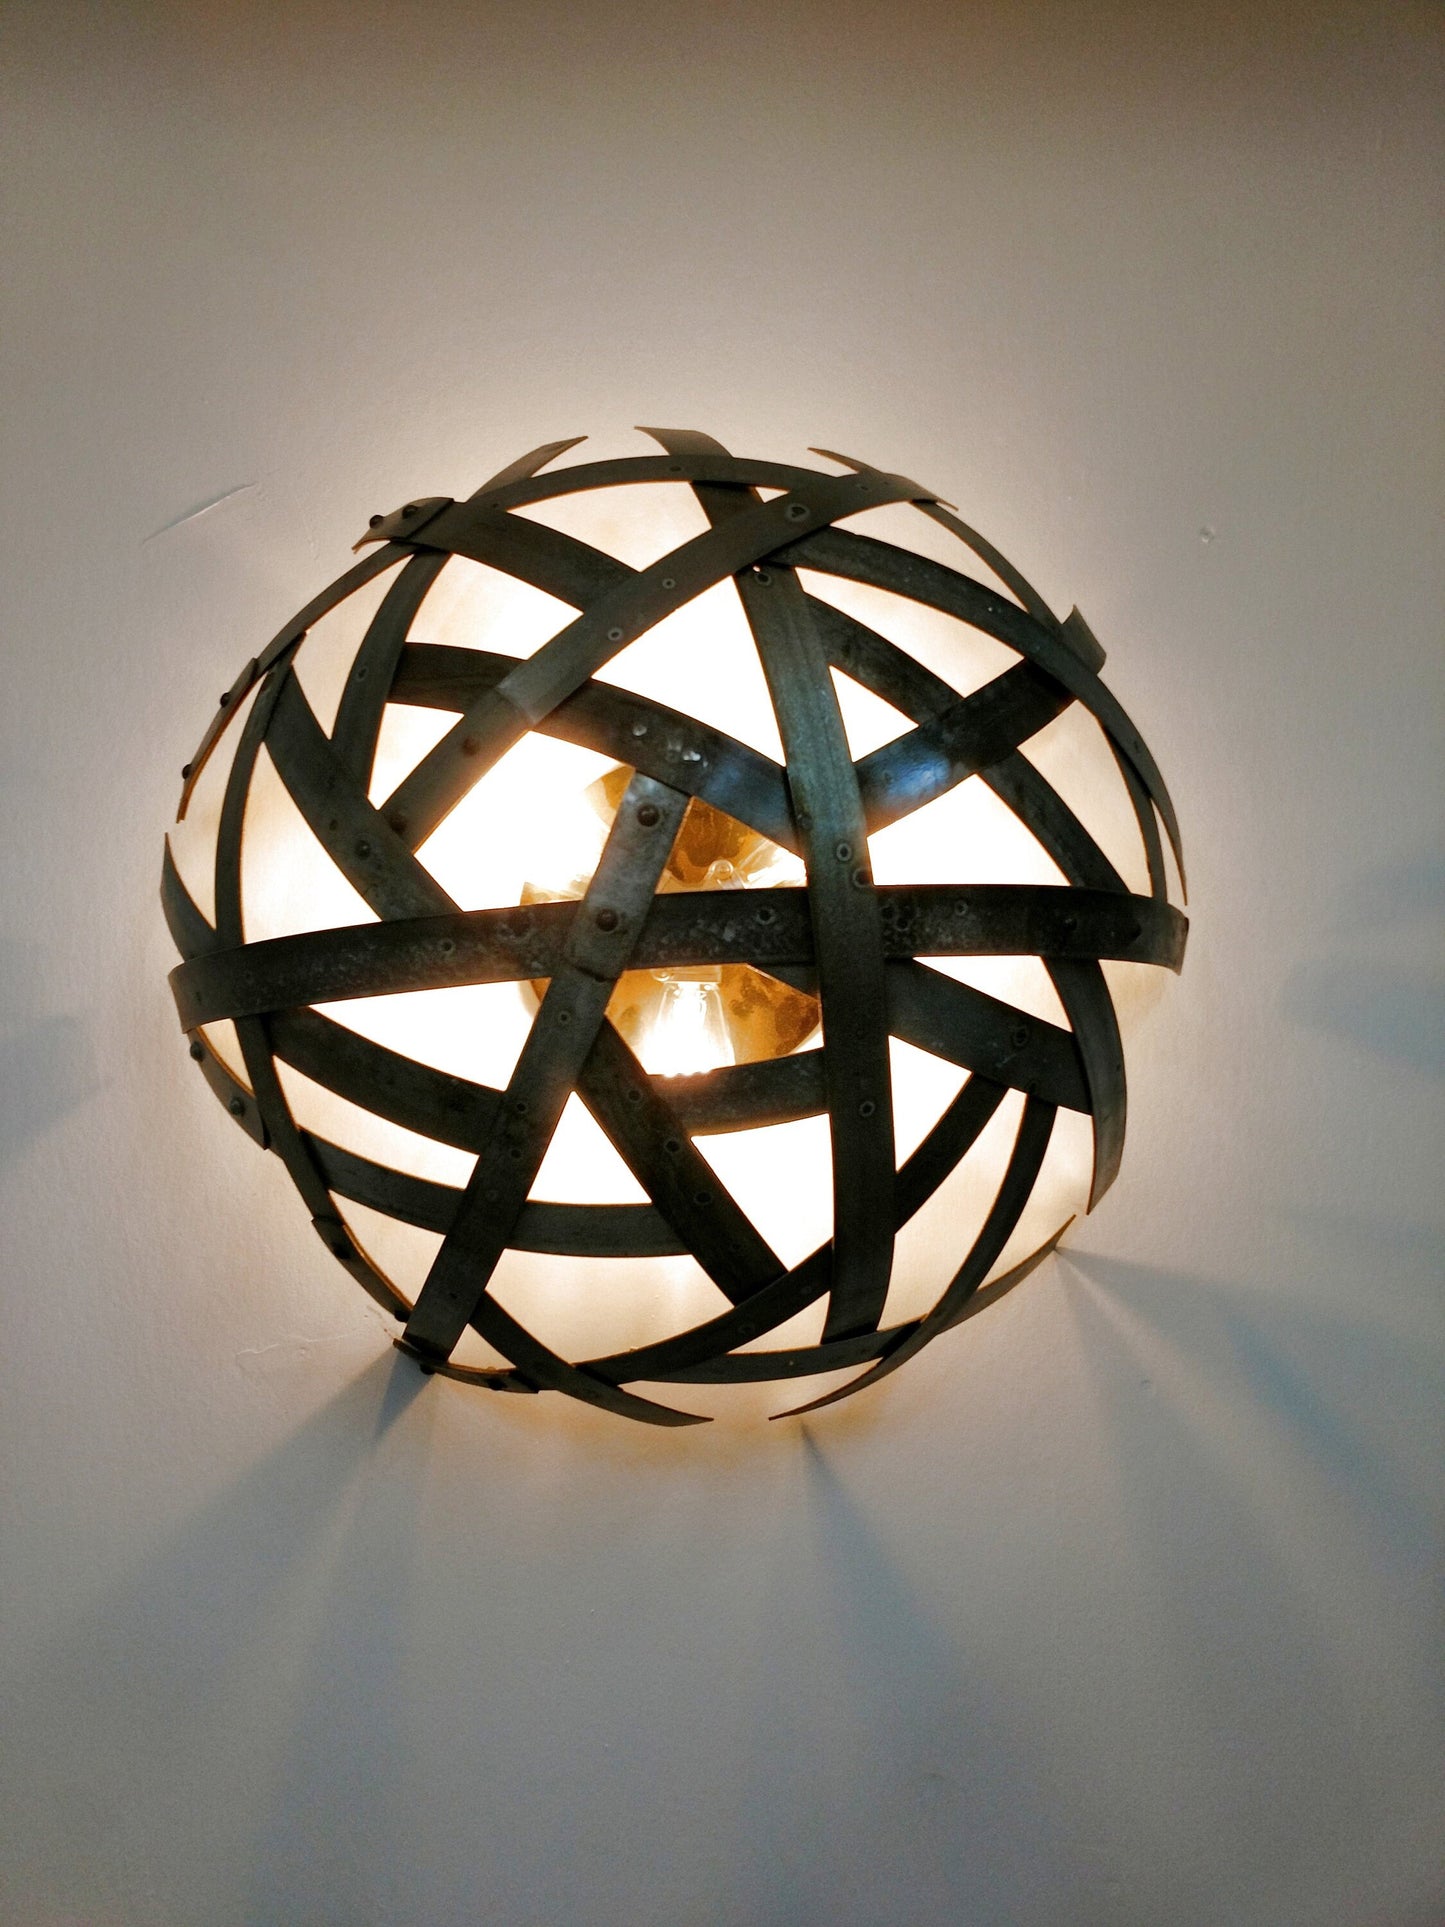 Wine Barrel Ring Sconce or Flush Mount Light - Kansi - Made from retired CA wine barrel rings. 100% Recycled!